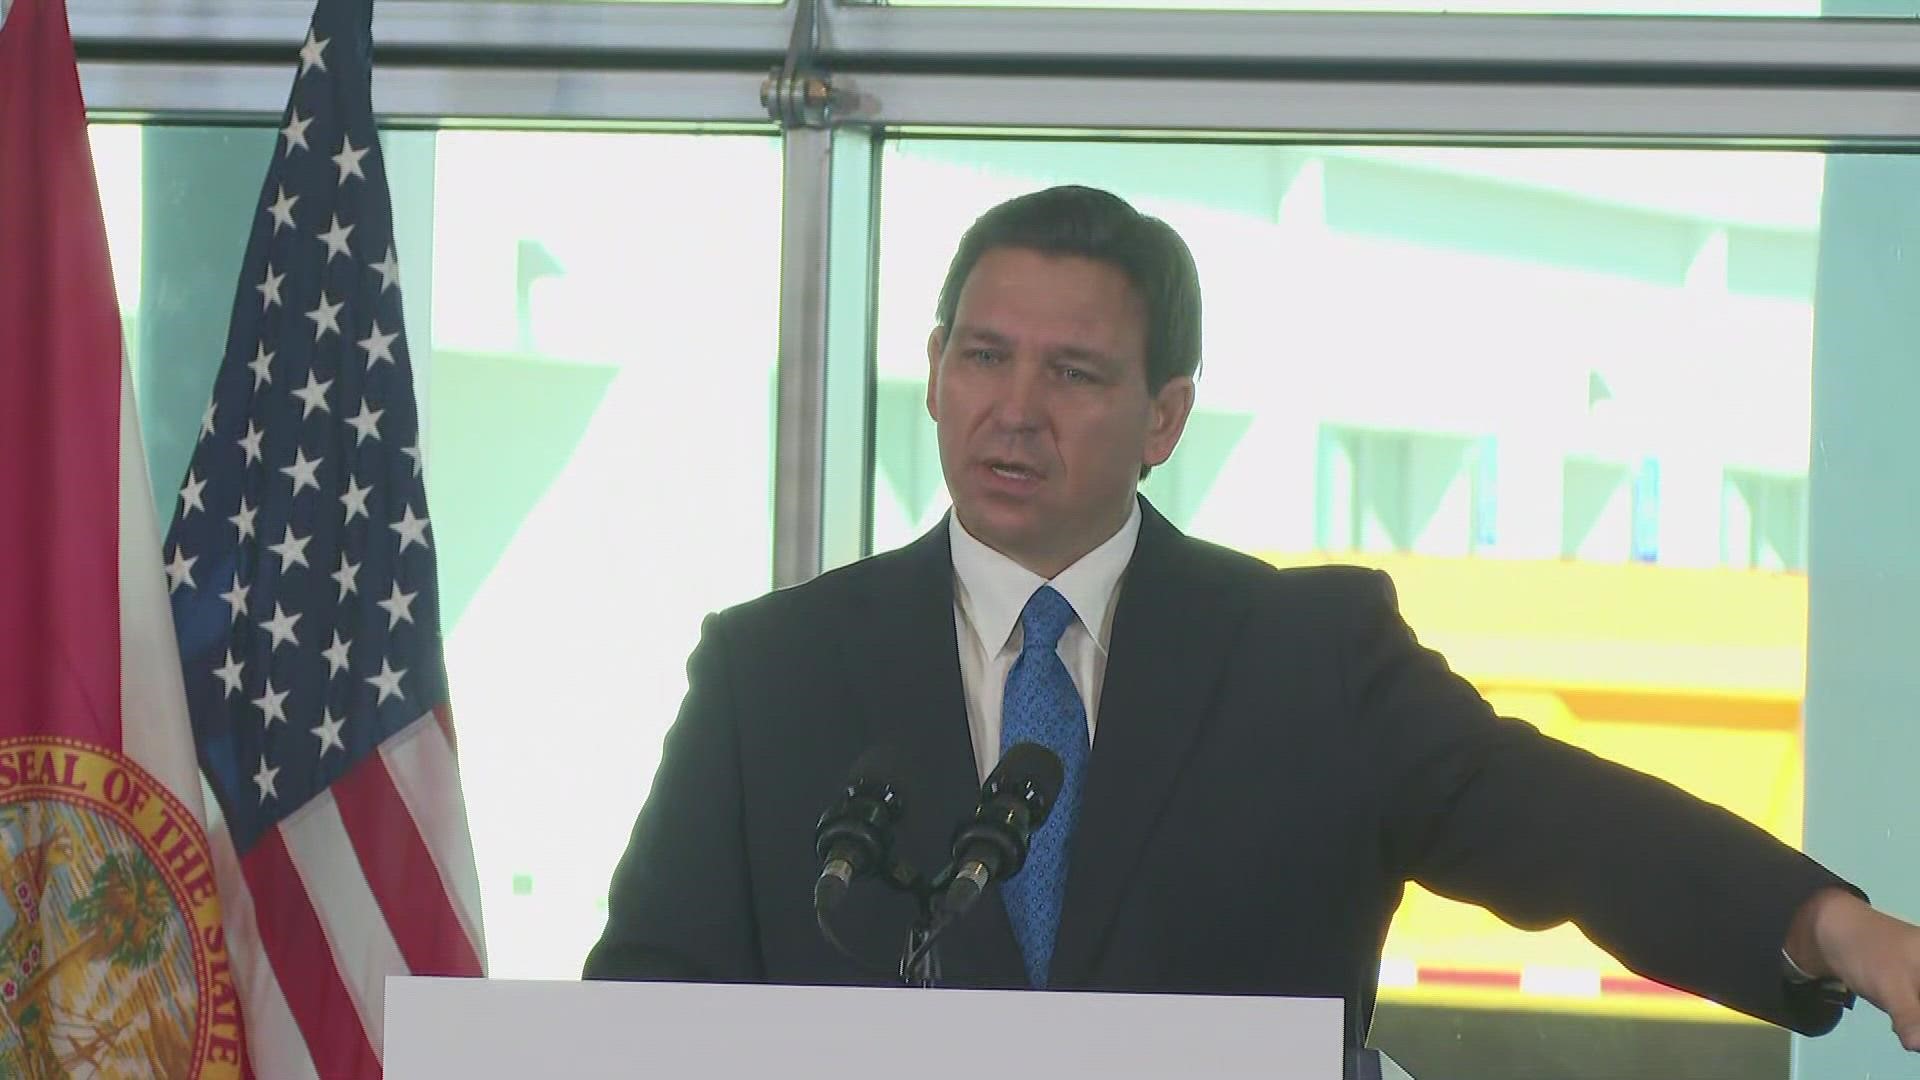 The funds would be distributed to 20 "major" road projects over the next four years, DeSantis explained.